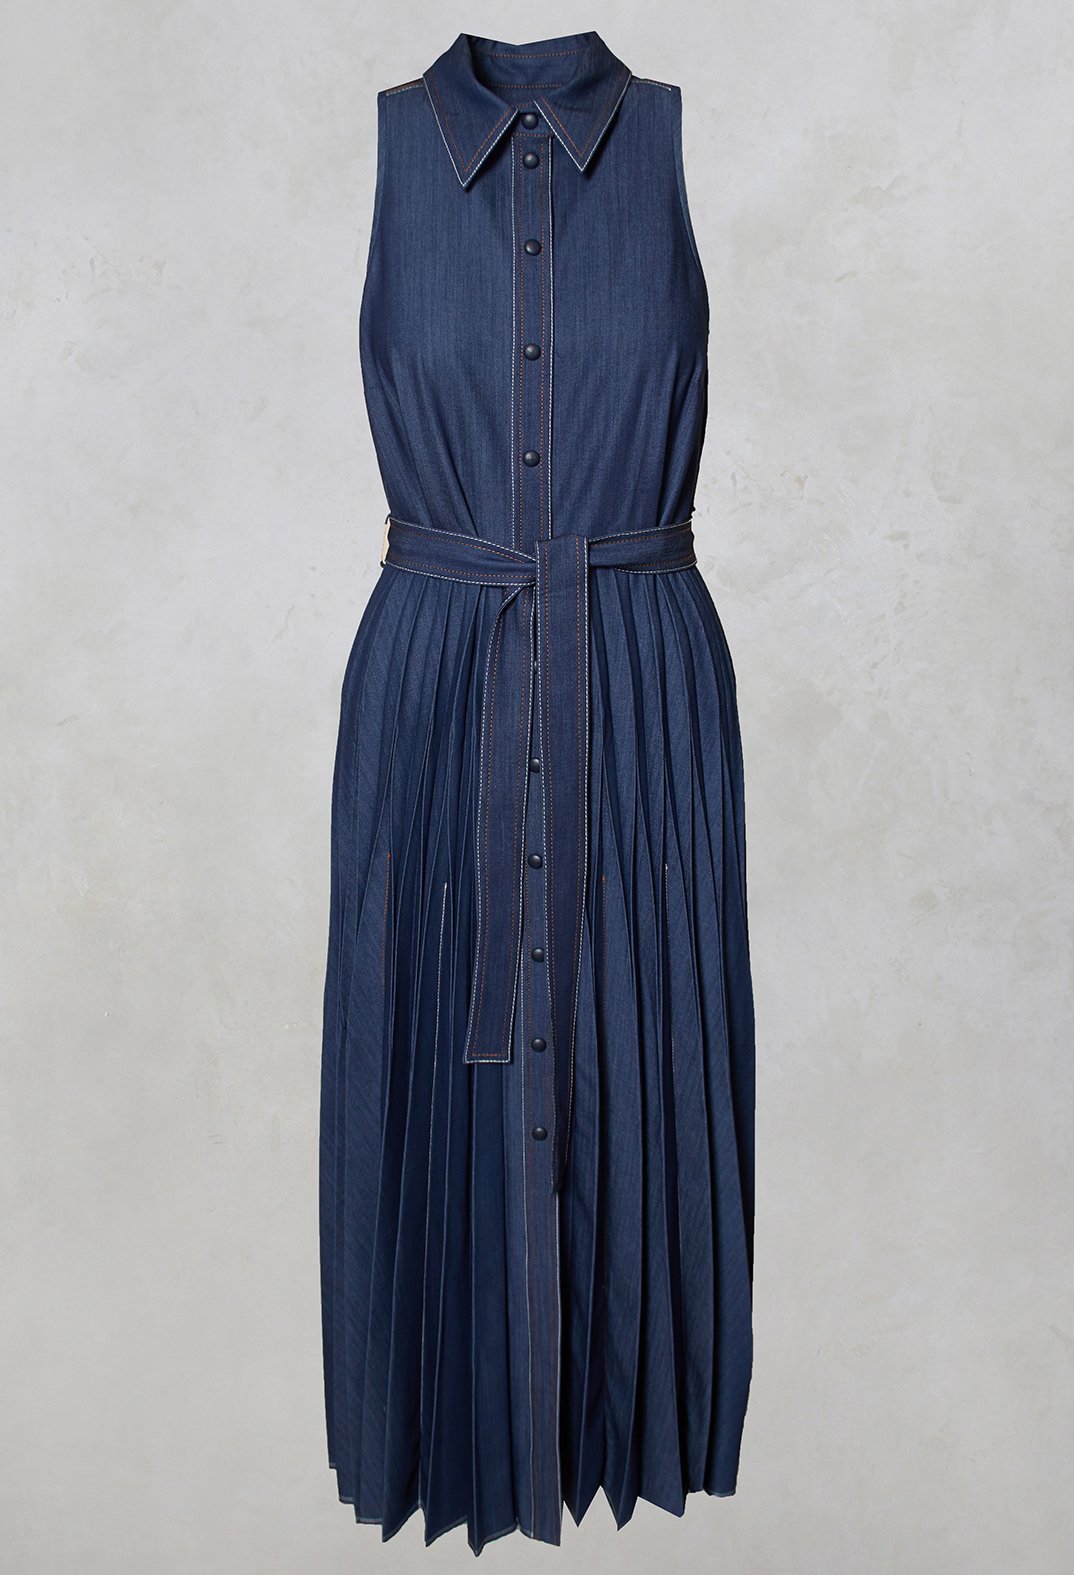 denim-look pleated dress front detailing with tie waistband